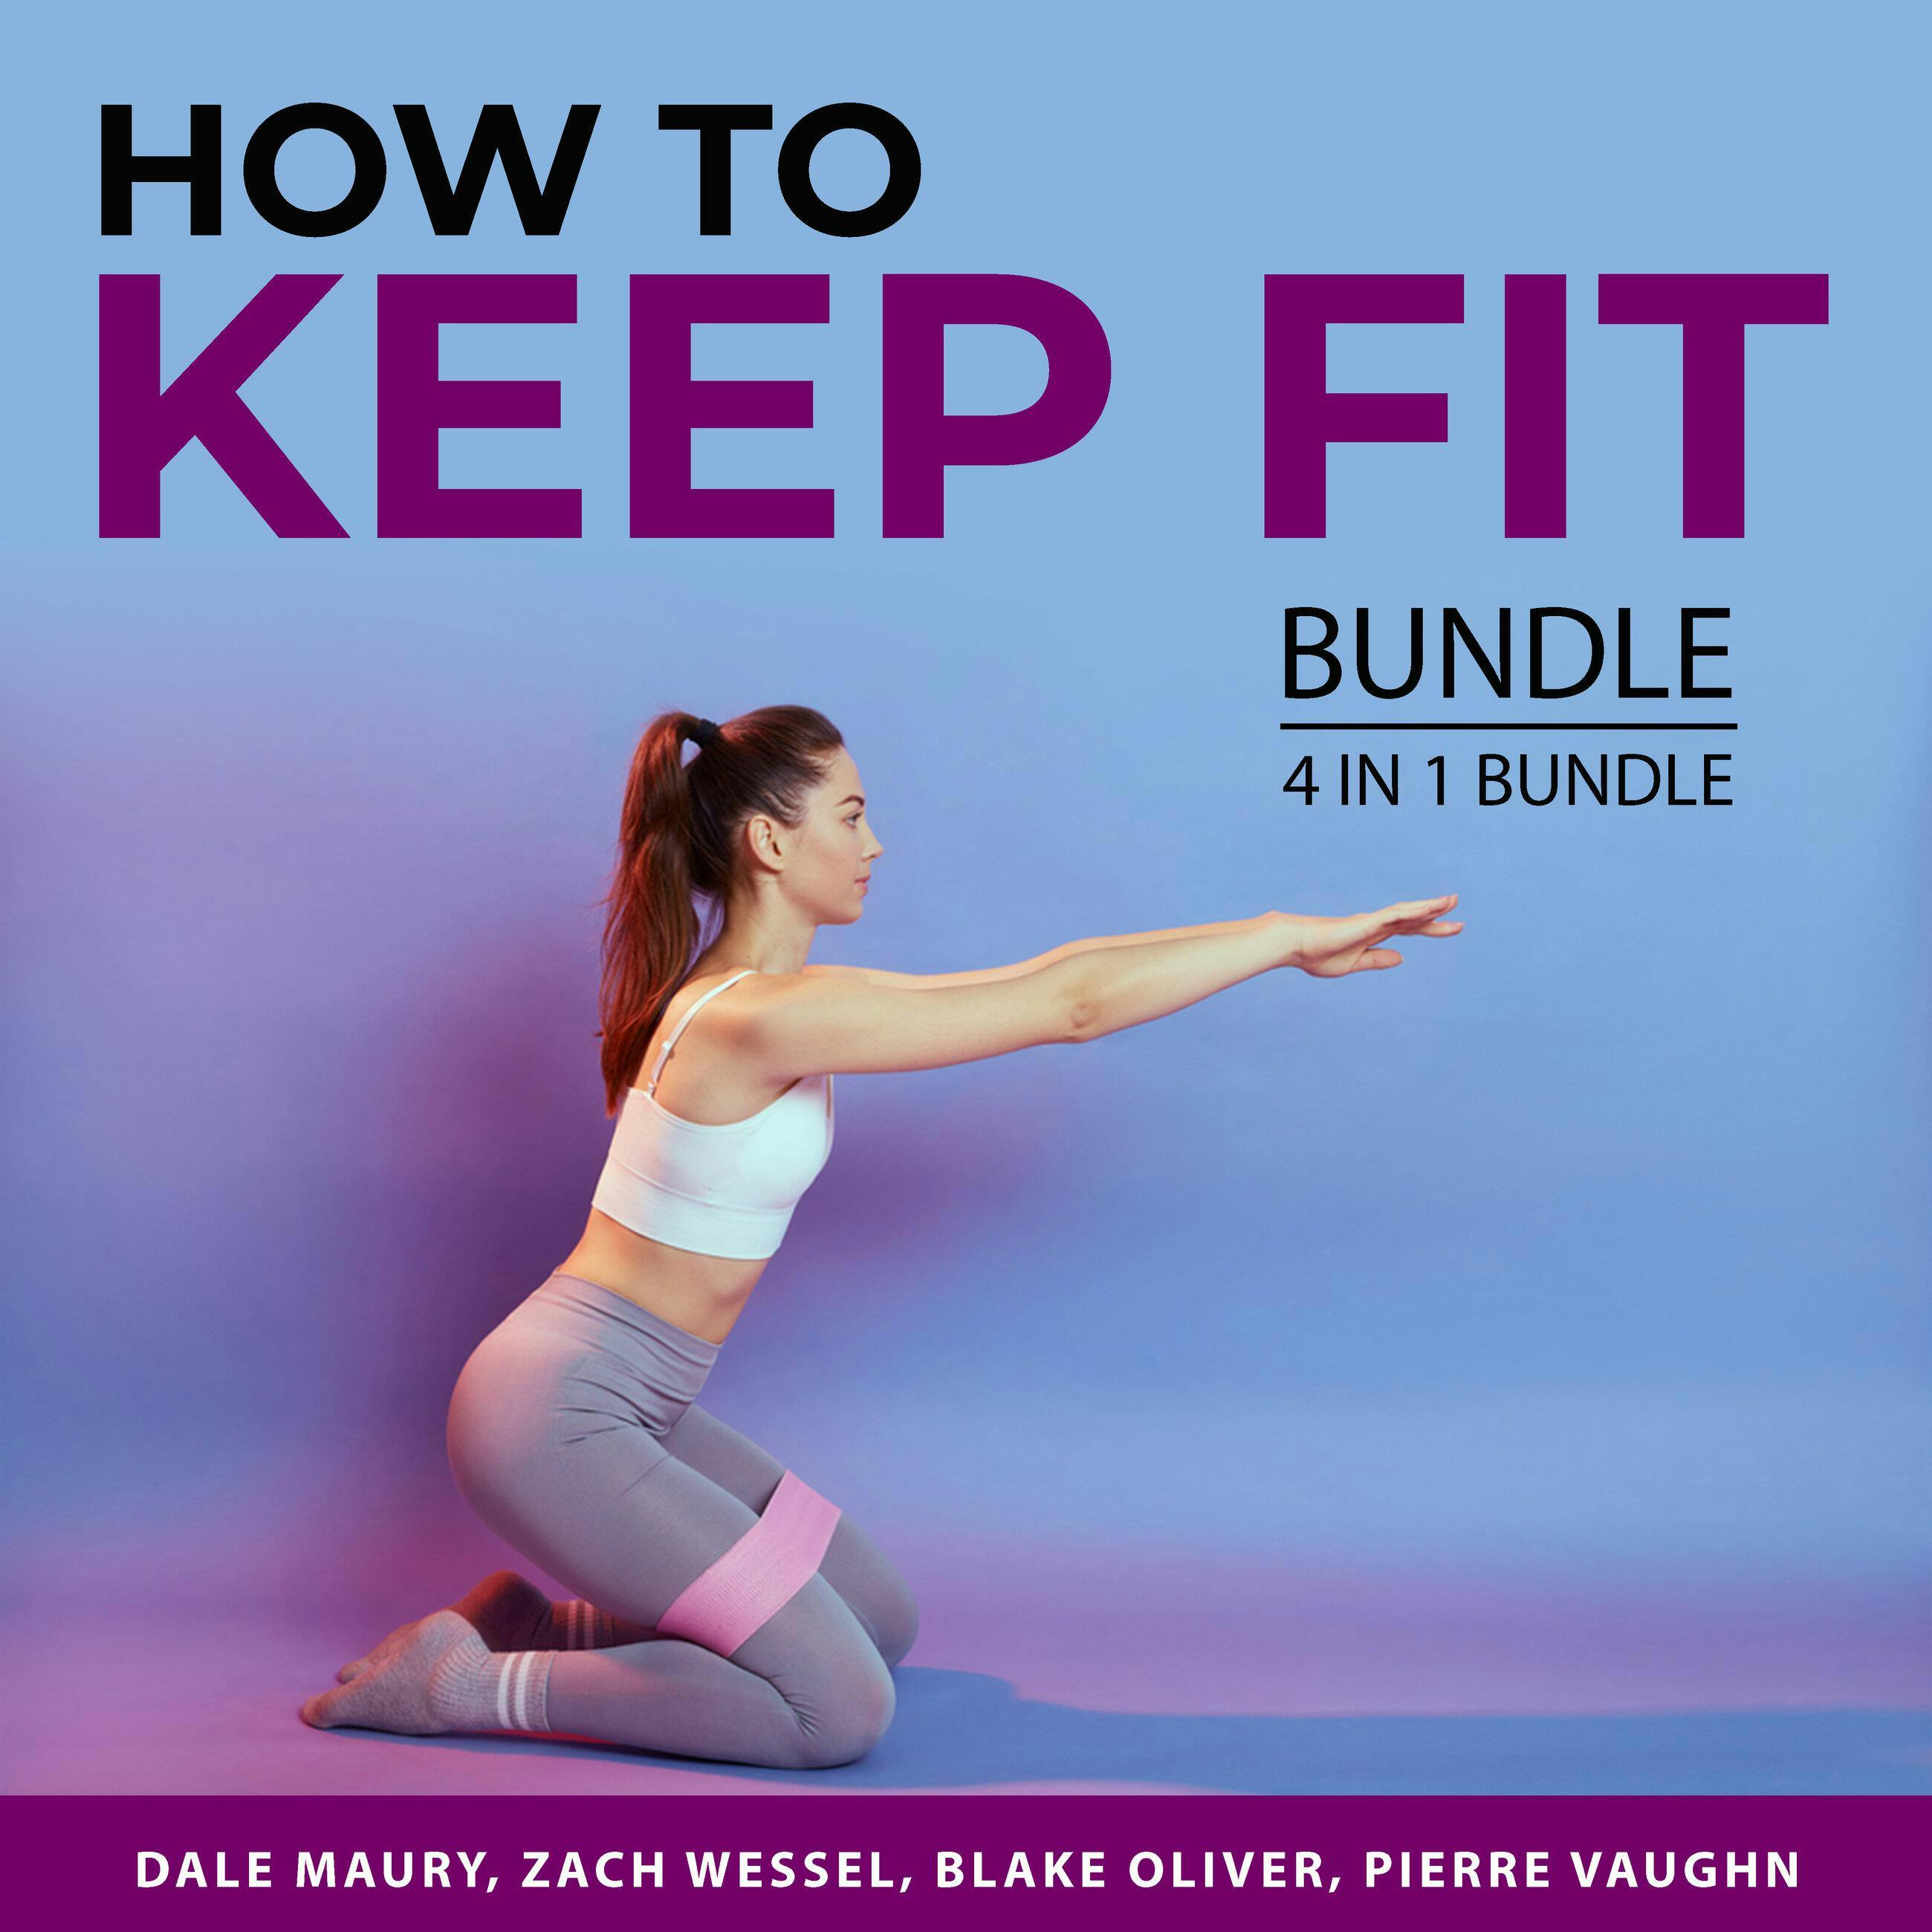 How to Keep Fit Bundle, 4 in 1 Bundle: Cycling Fun, Effective Jogging, Fitness Mindset, and Stronger and Healthier Body - undefined